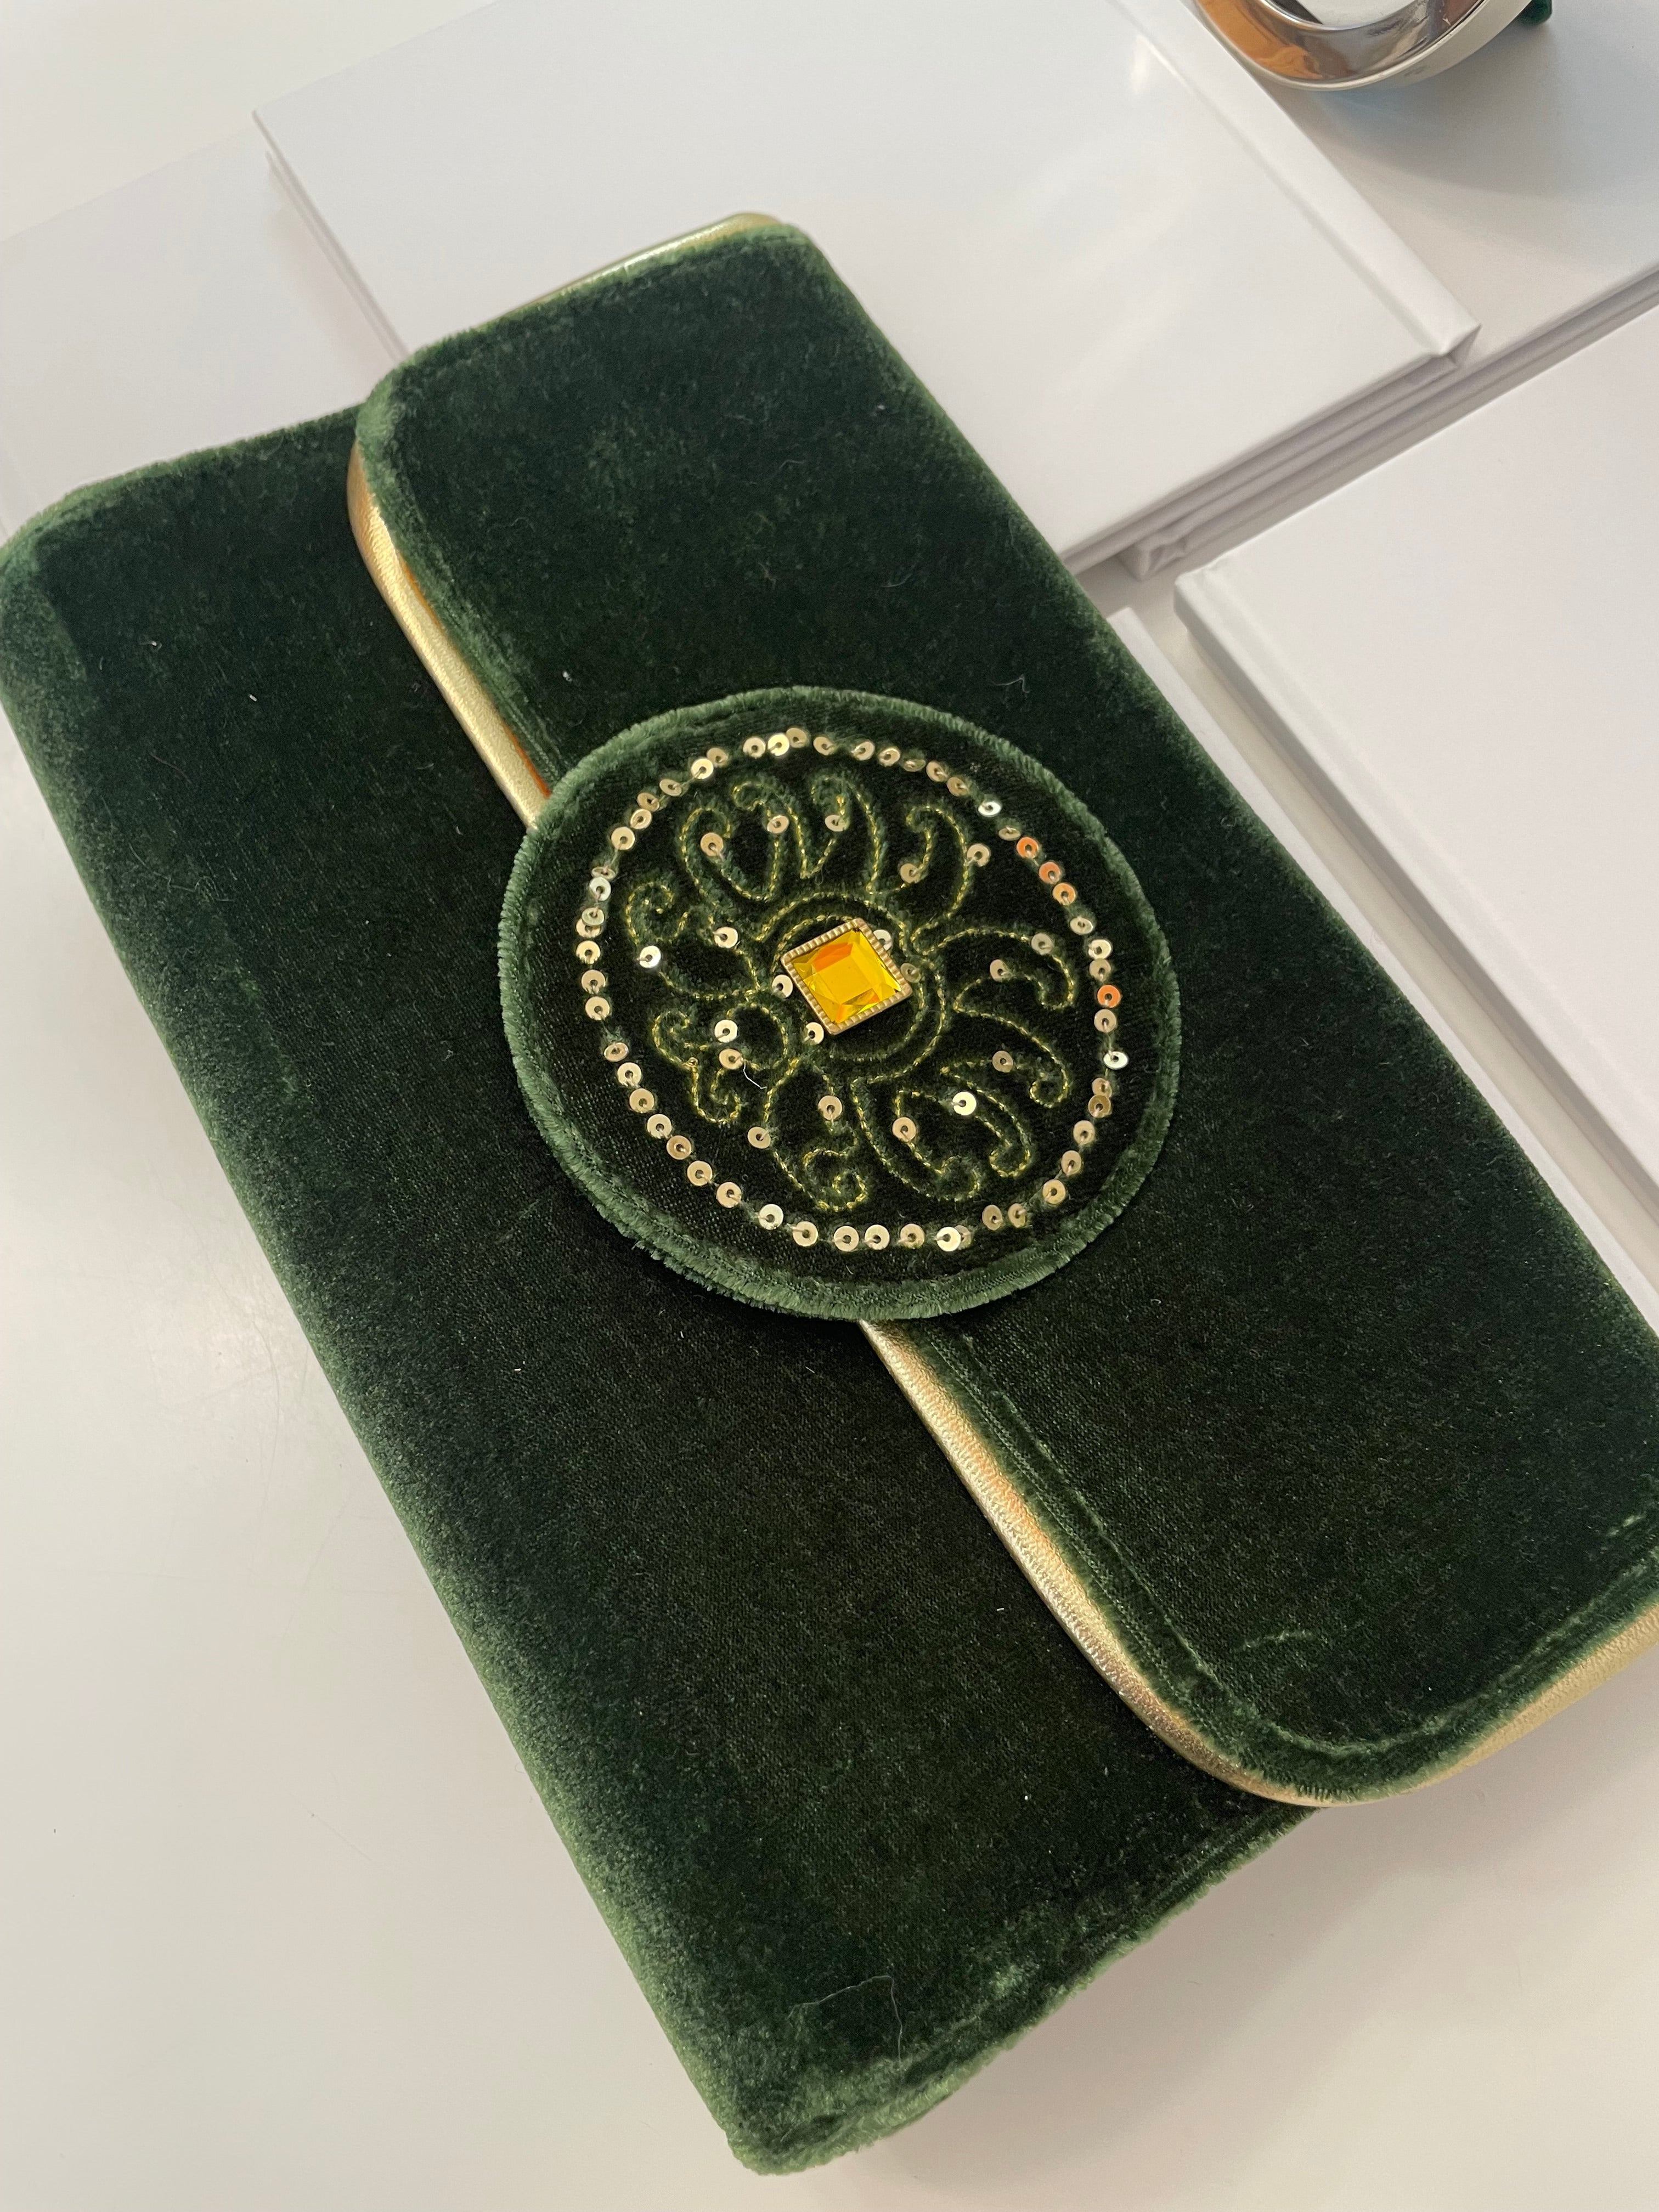 The most beautiful green velvet clutch bag, adorned with loveliest gold stone, and sequins... so elegant